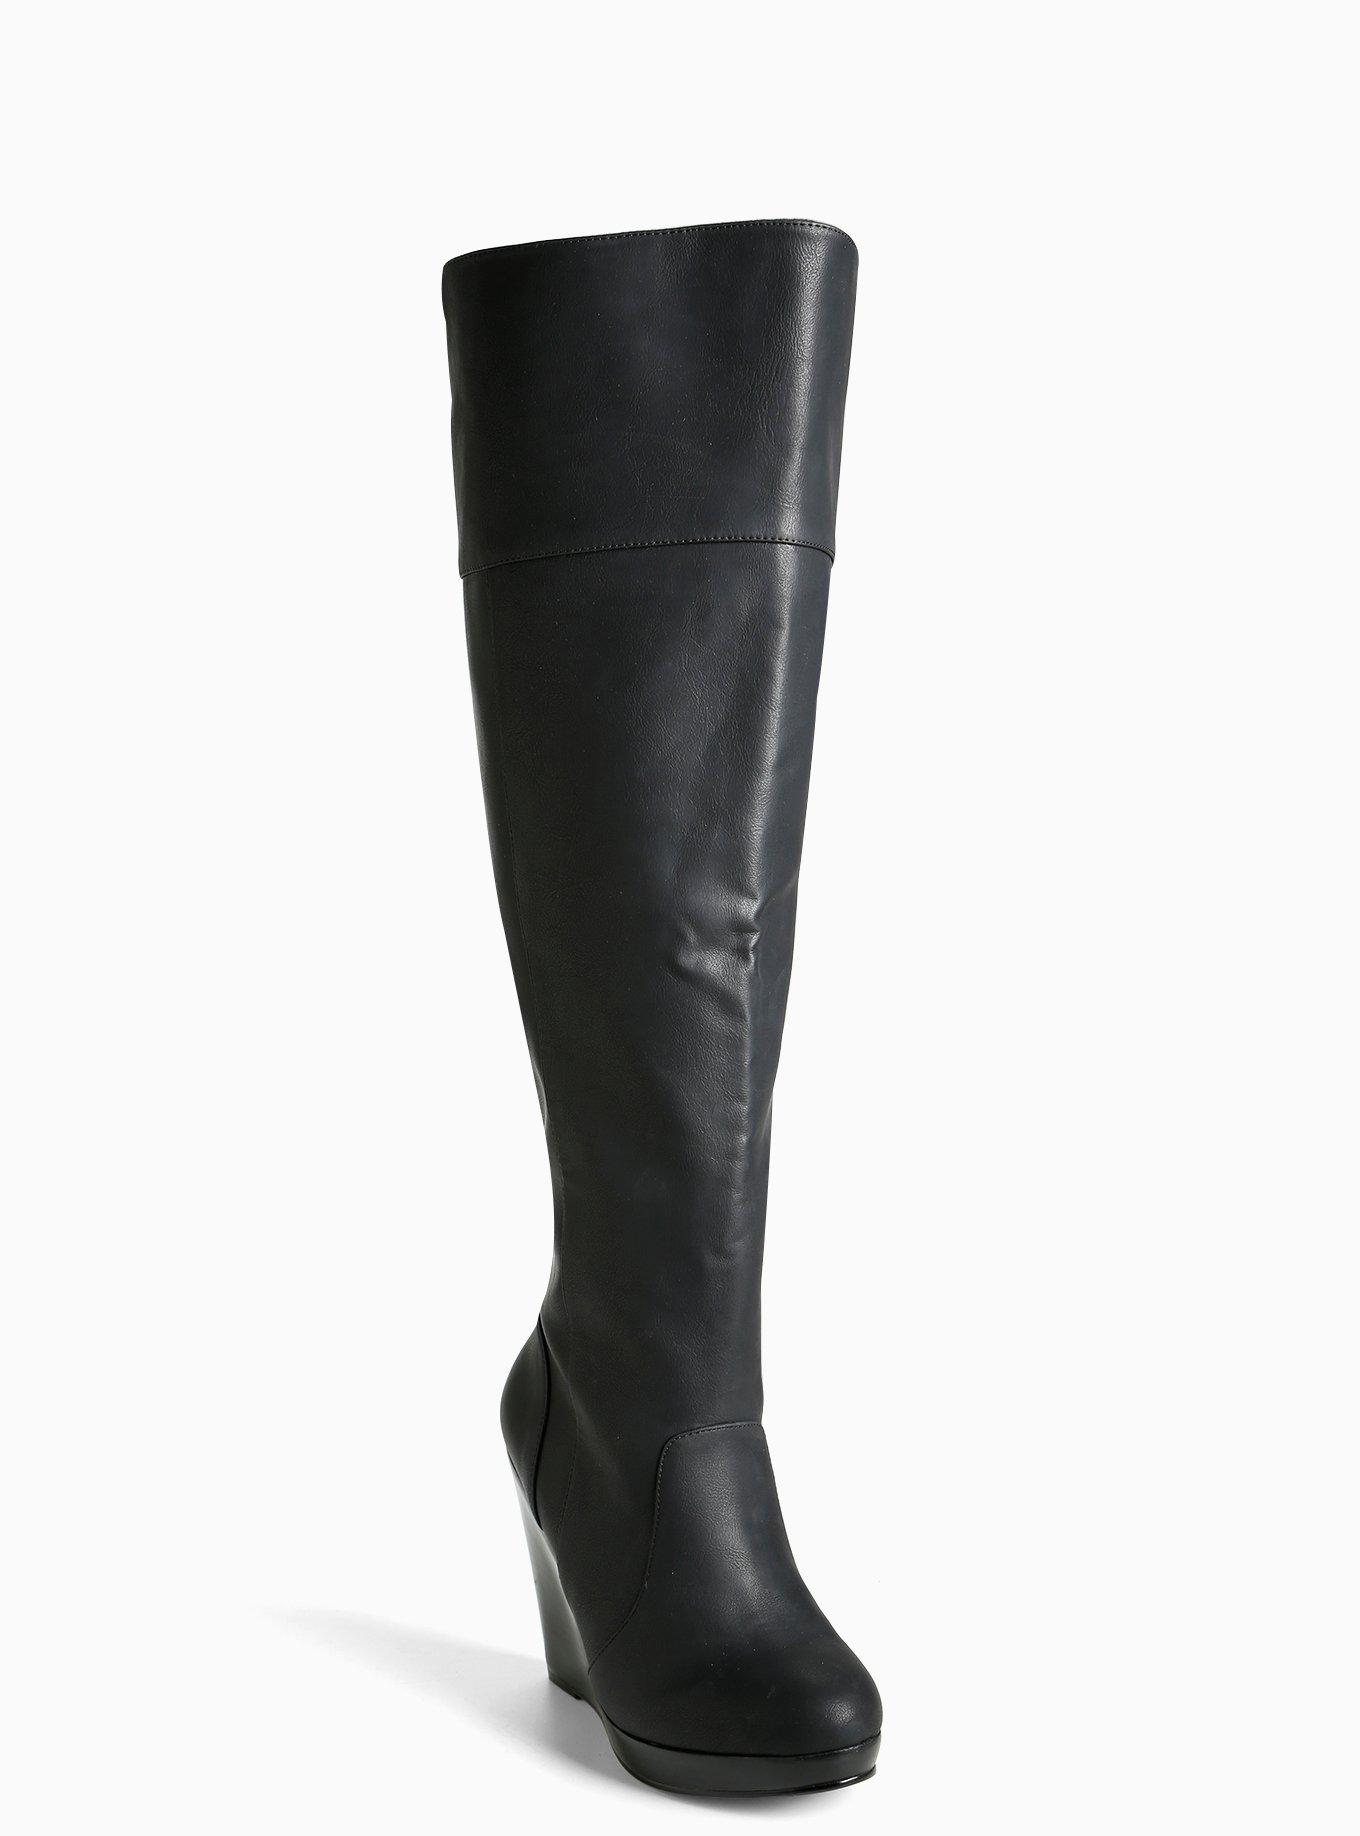 Wide Calf Wedge Boot Outlet | www.medialit.org